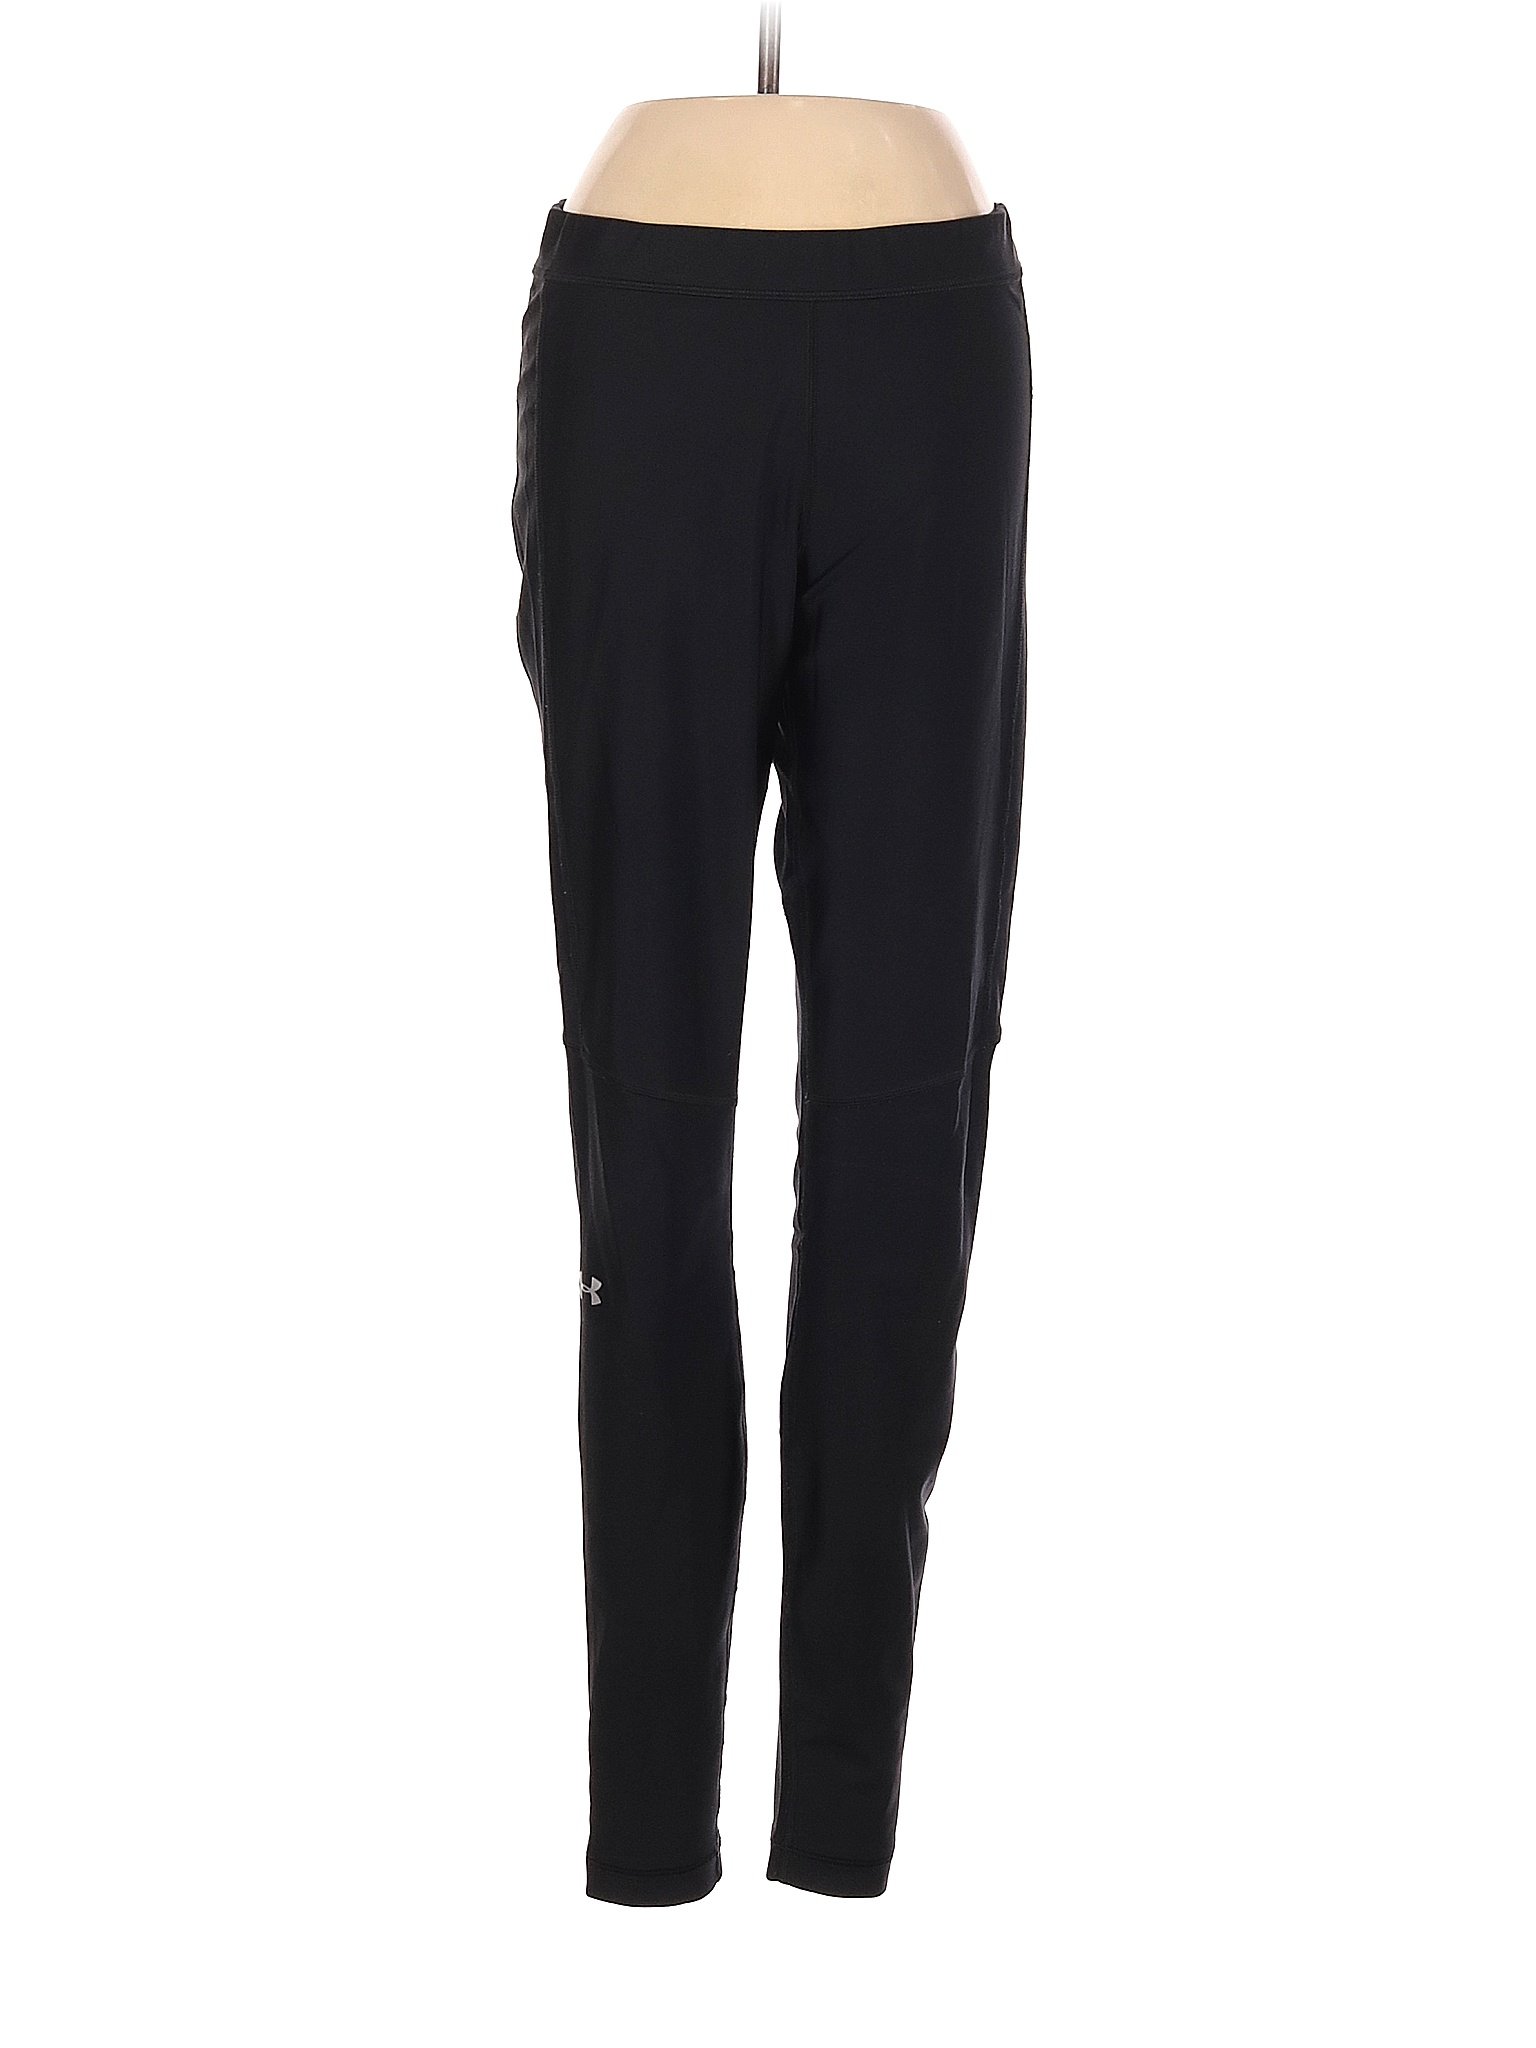 Under Armour Solid Black Yoga Pants Size S - 83% off | thredUP